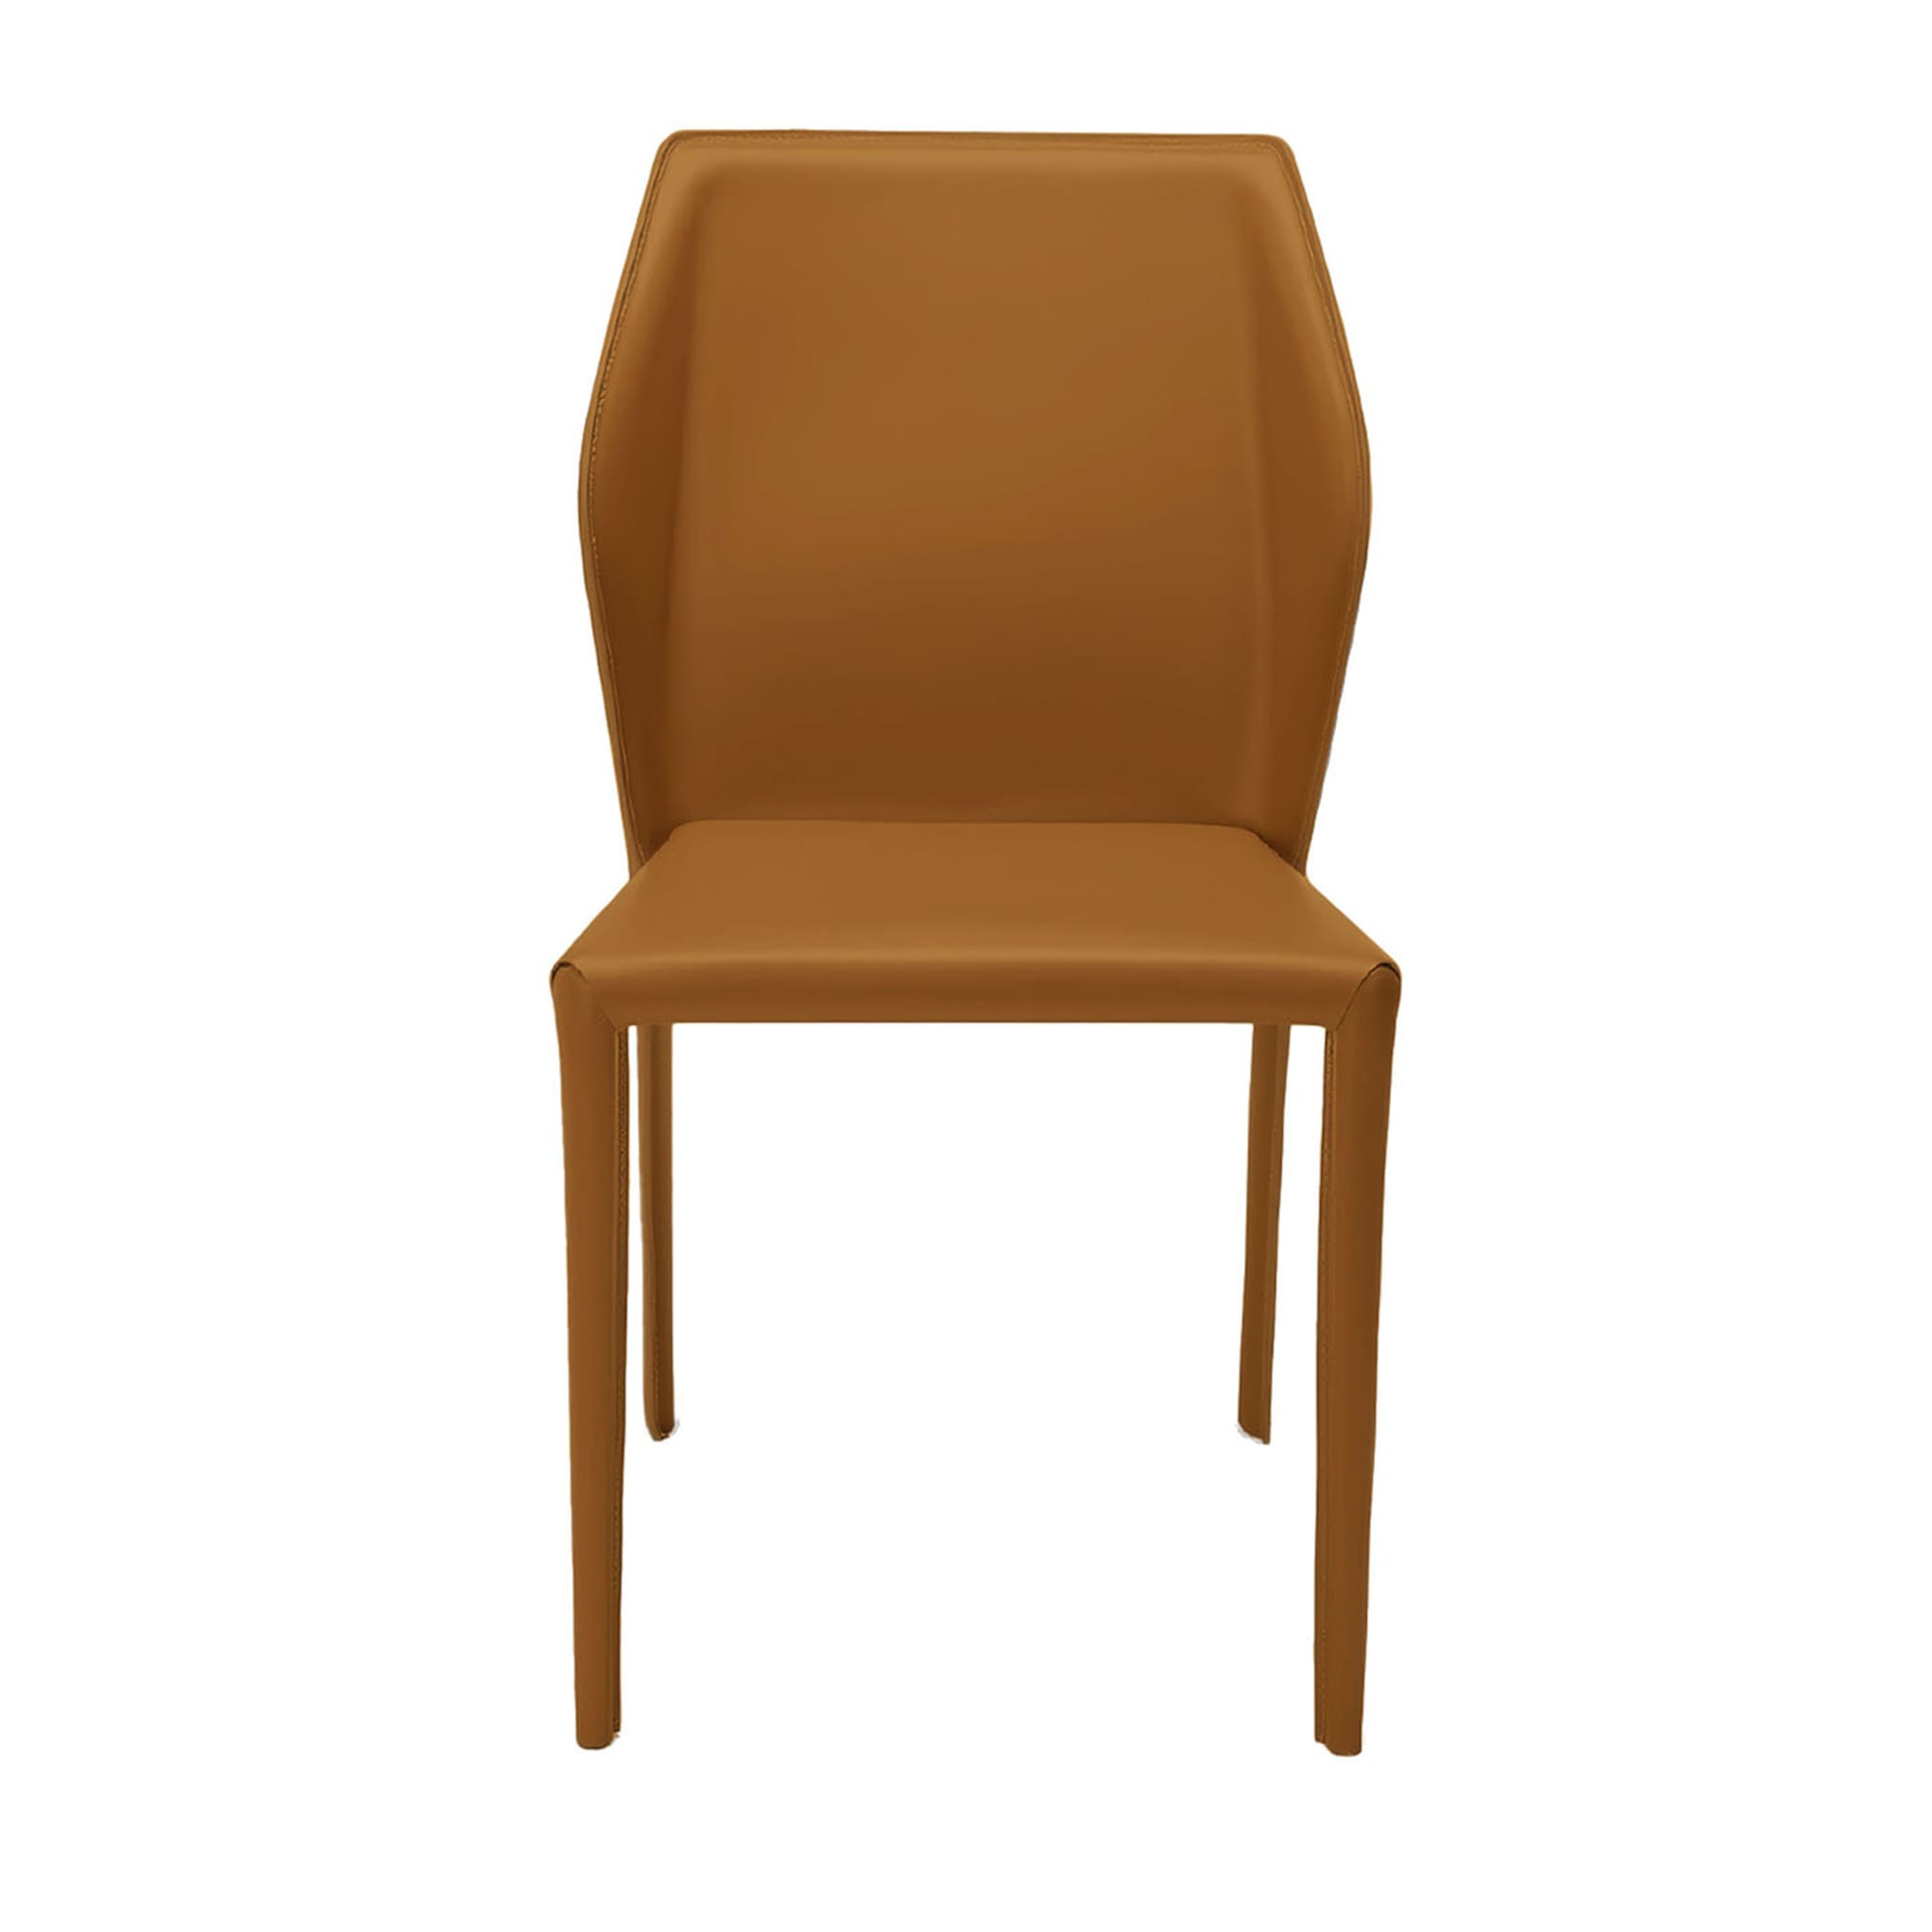 Set of 2 Fold Chair #1 - Main view